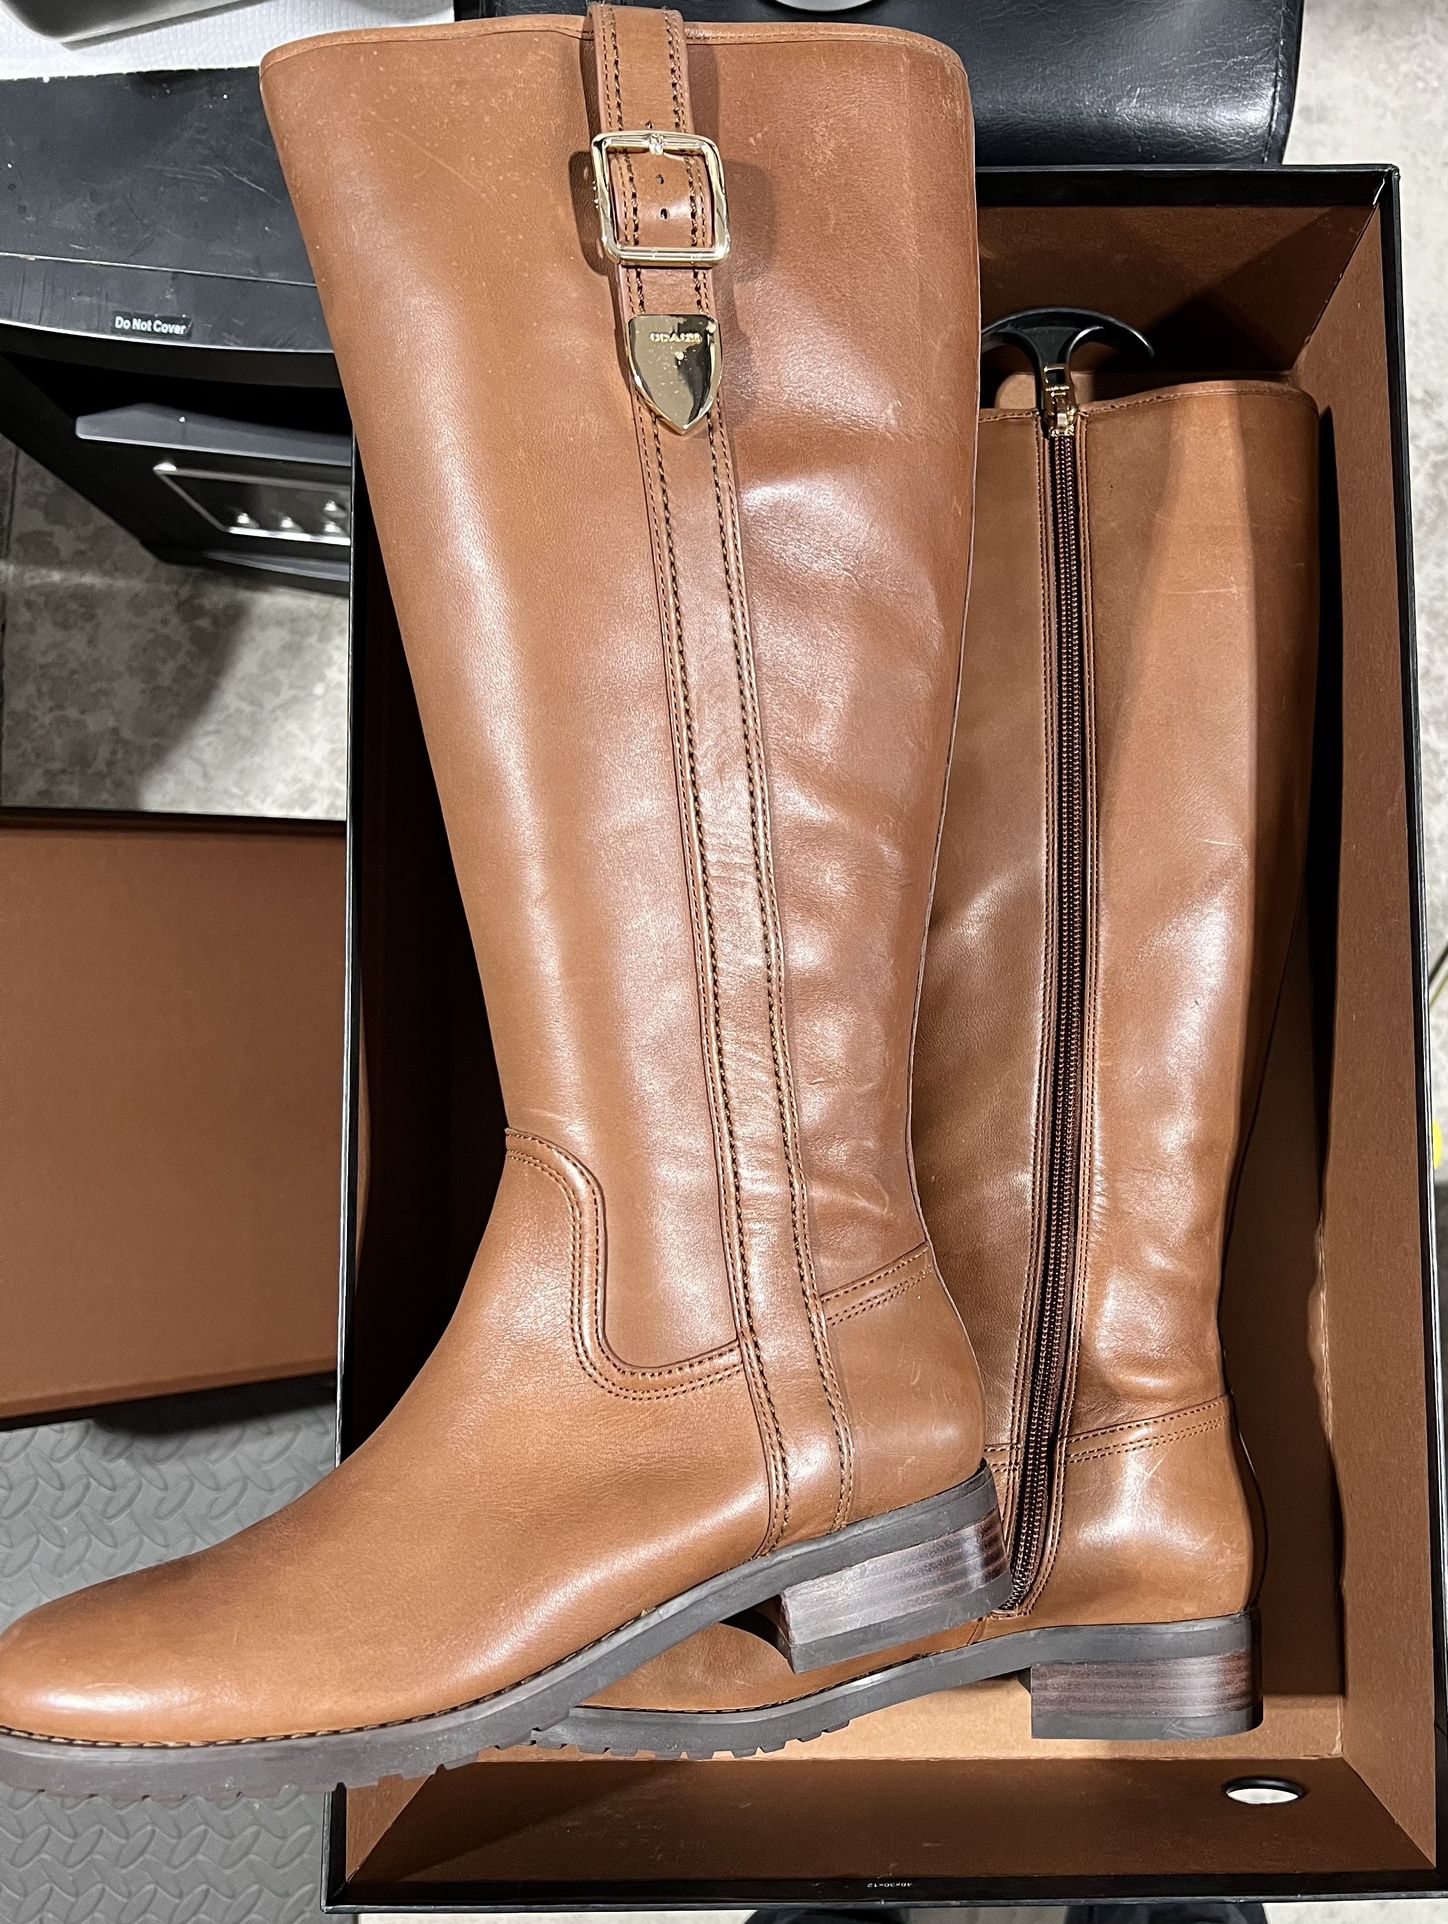 Coach Tall Boots Size 7